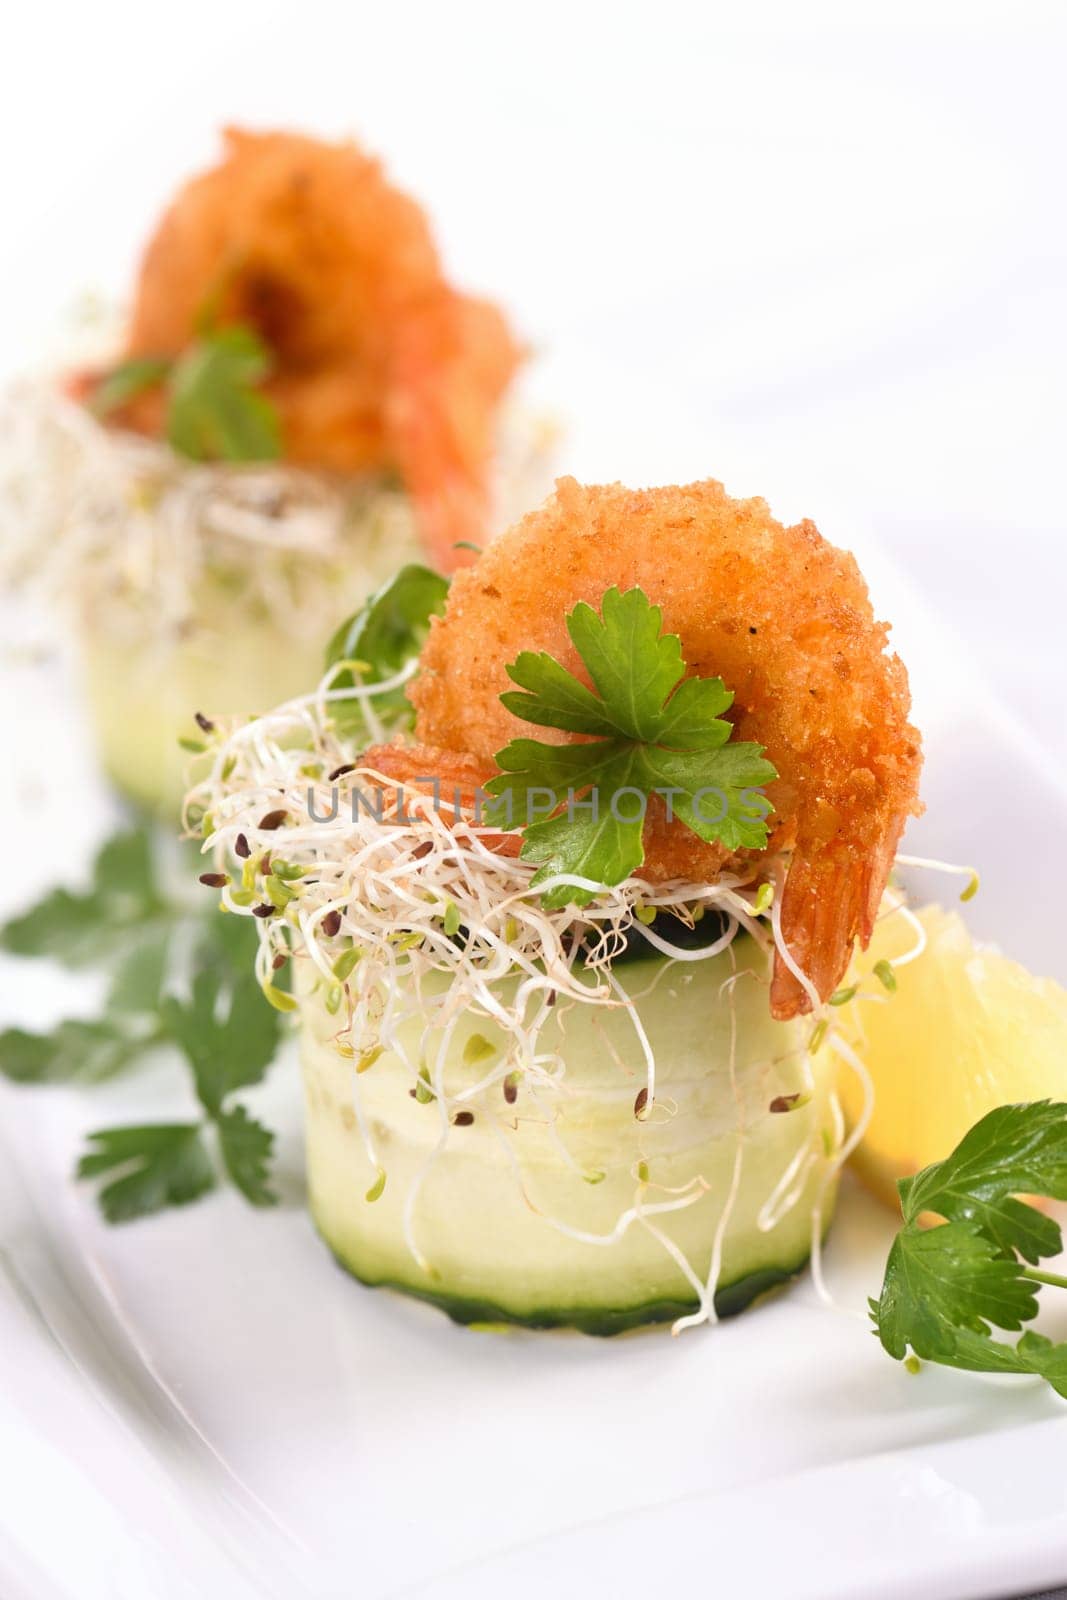 Cucumber appetizer with fried breaded shrimp on a bed of microgreens